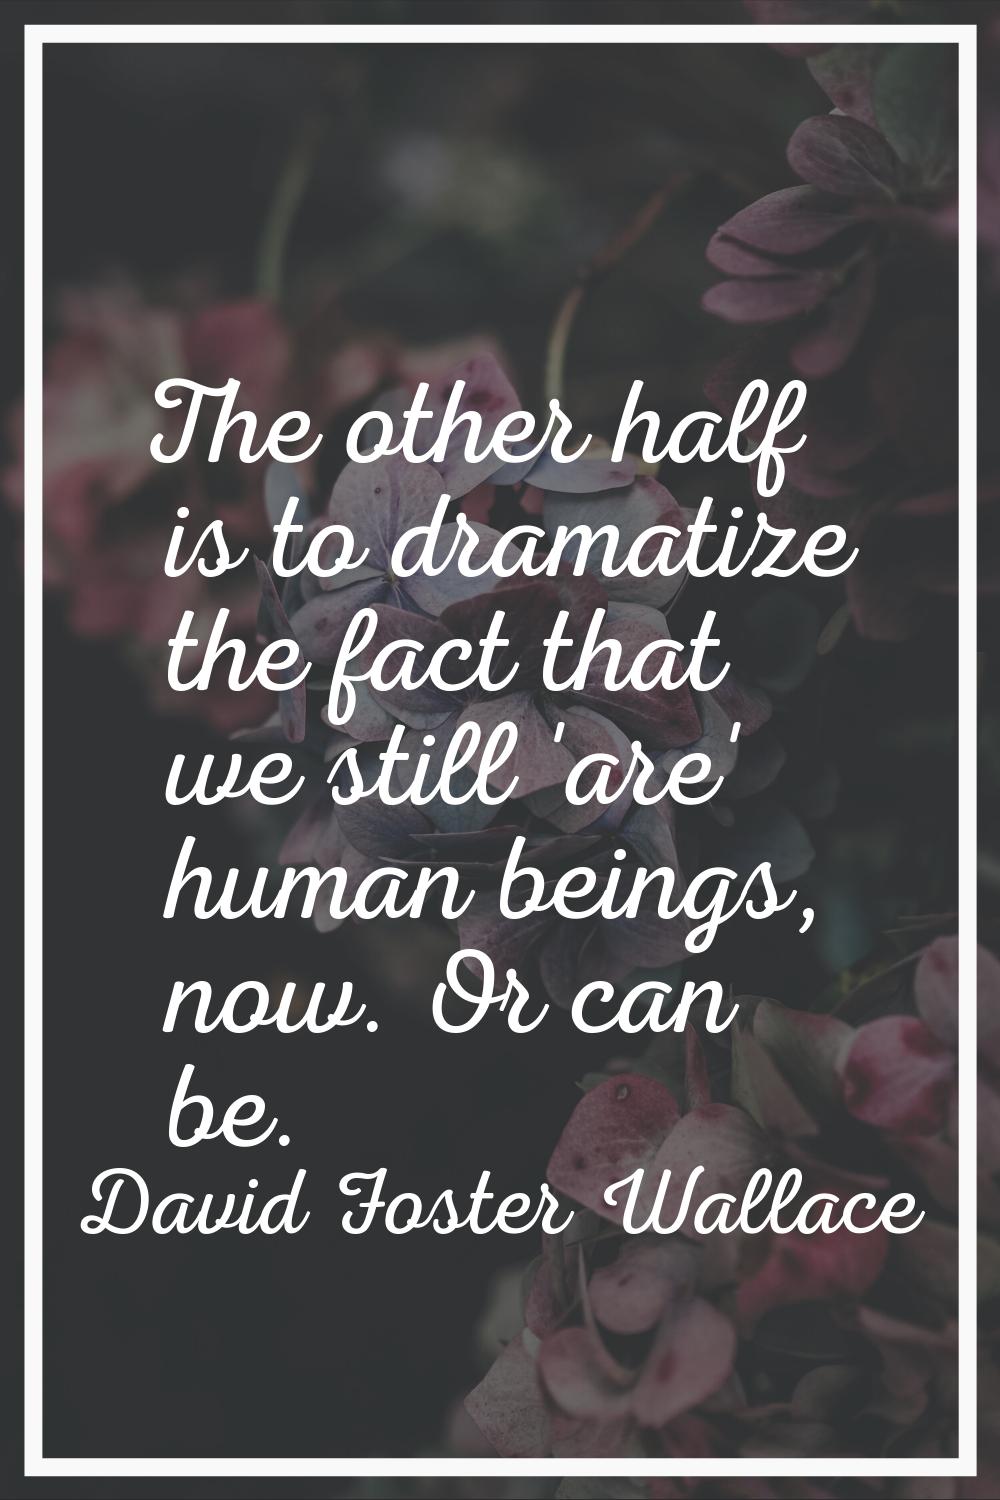 The other half is to dramatize the fact that we still 'are' human beings, now. Or can be.